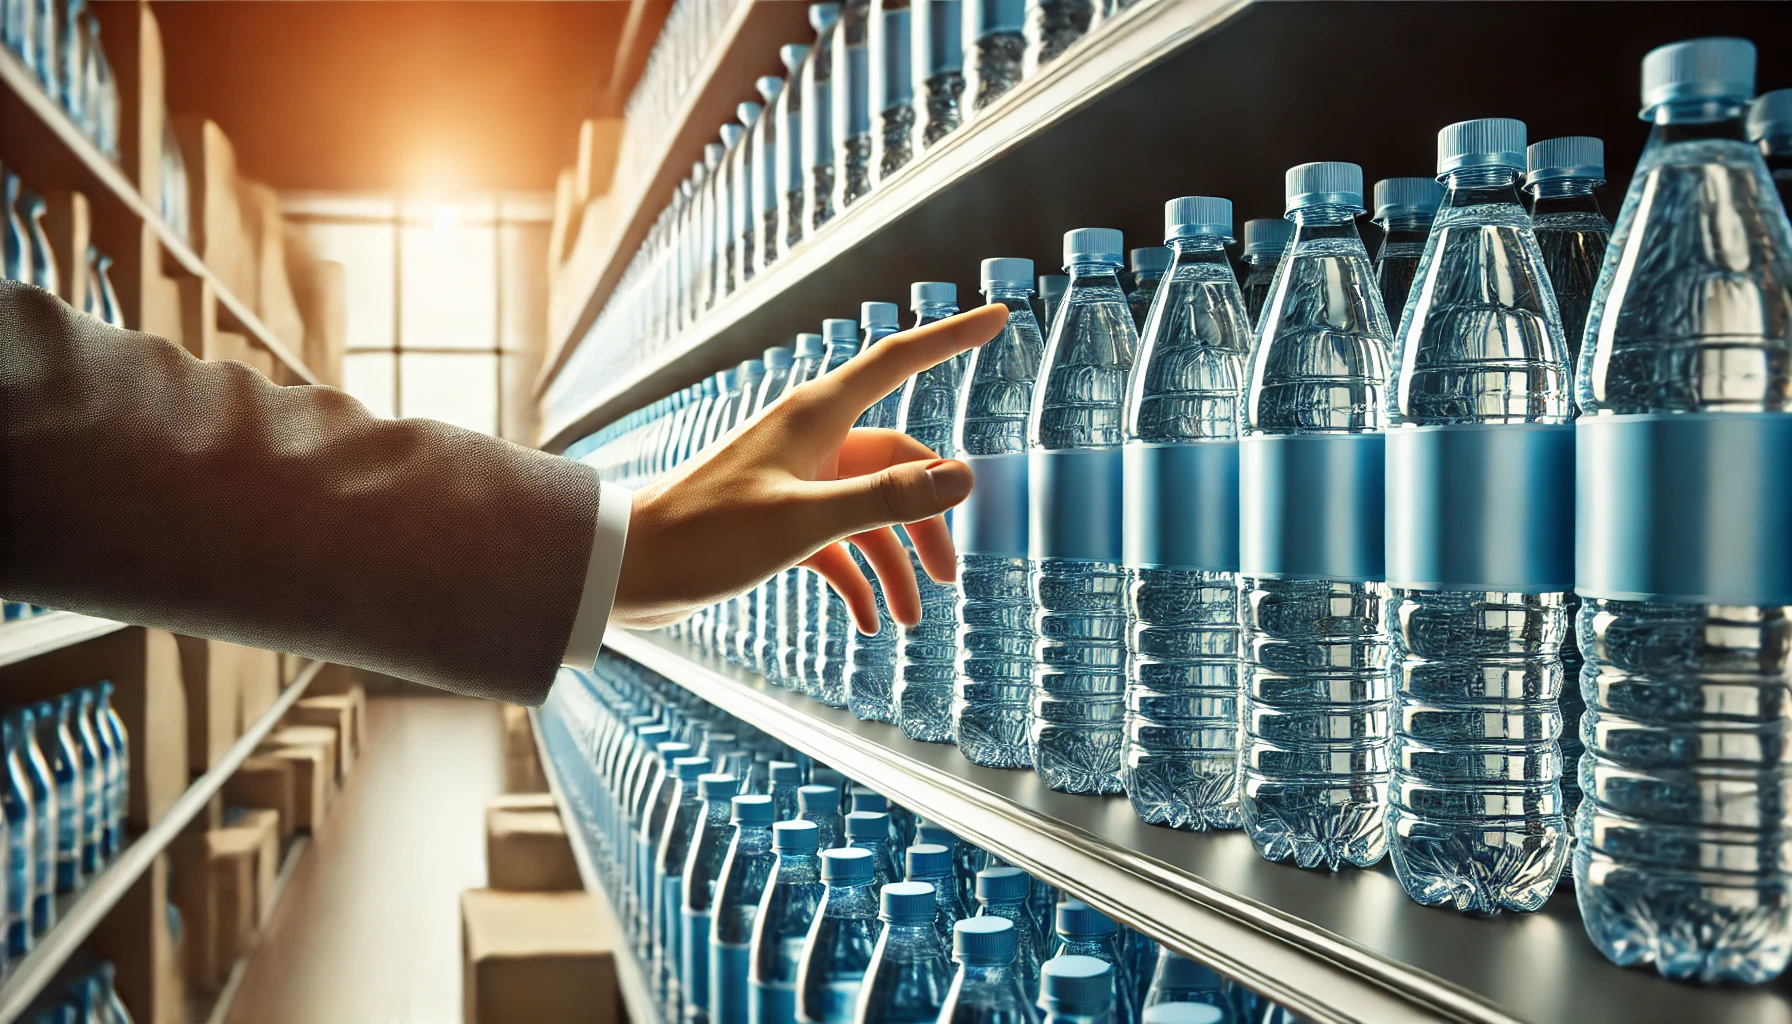 The Consensus: We May Be Getting Too Much Bisphenol a (BPA) but There’s a Lot of Uncertainty